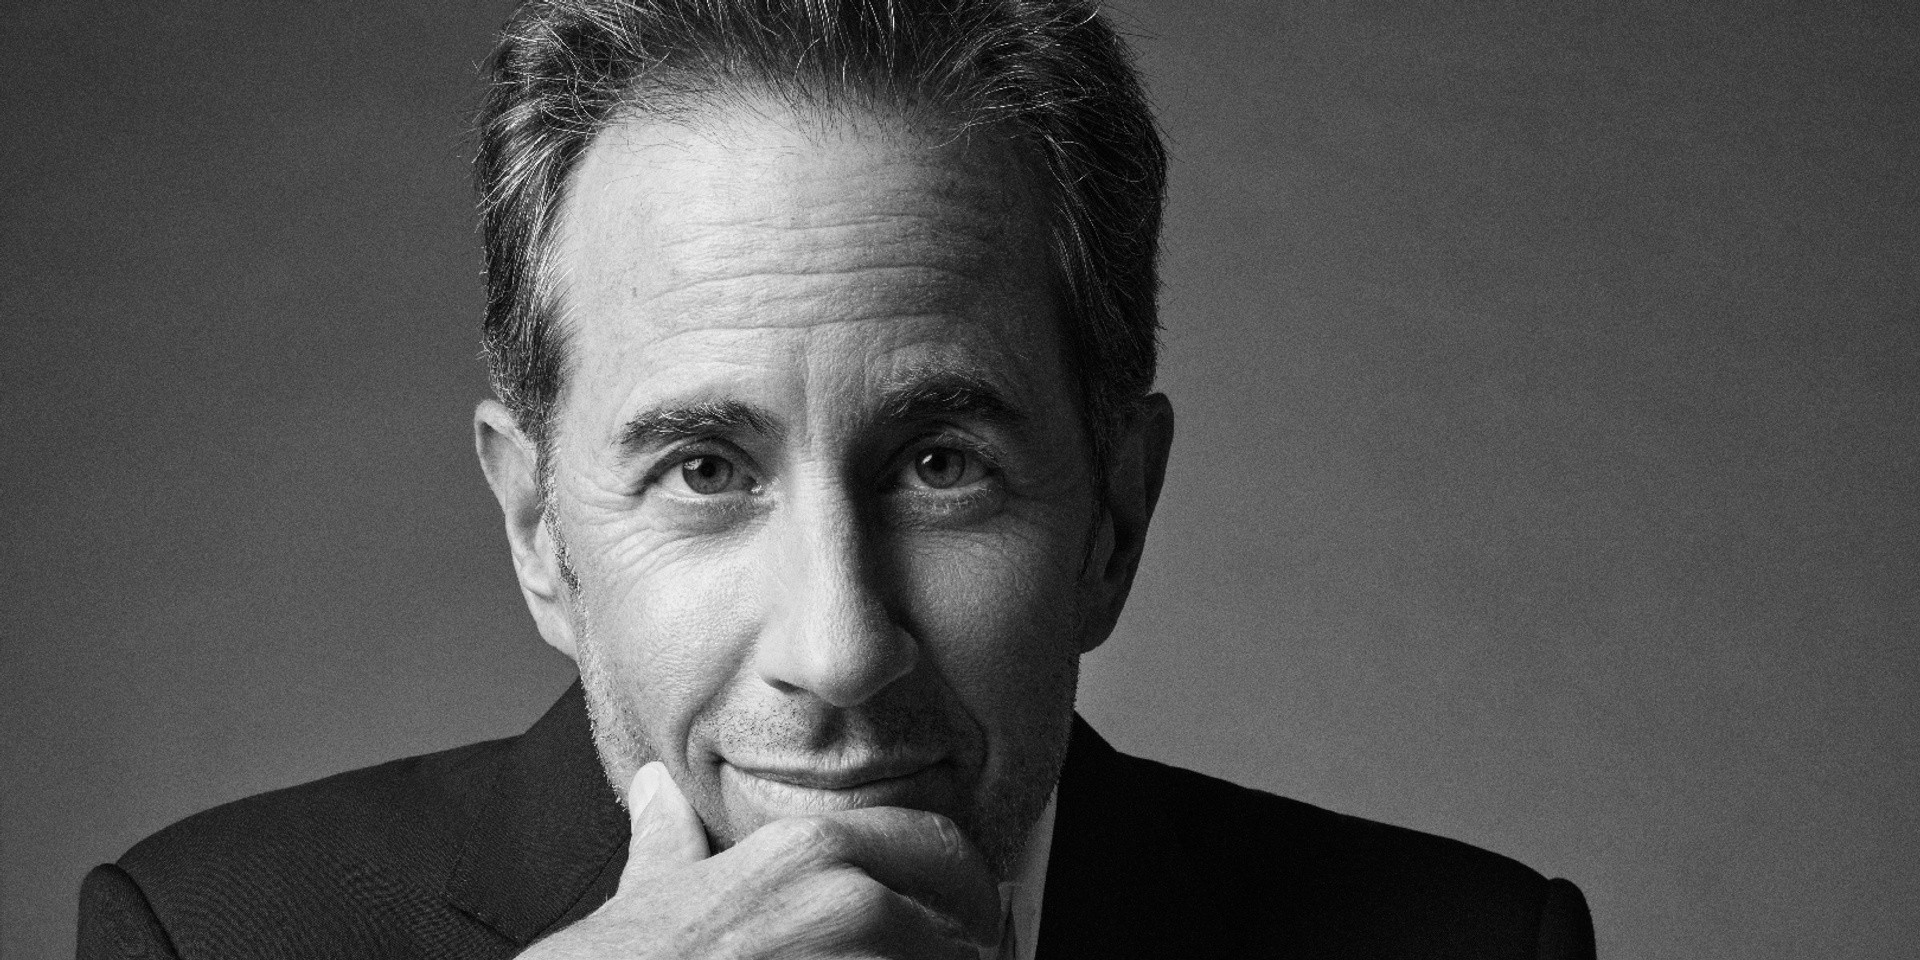 Jerry Seinfeld is coming to Singapore this month, more seats added to the show